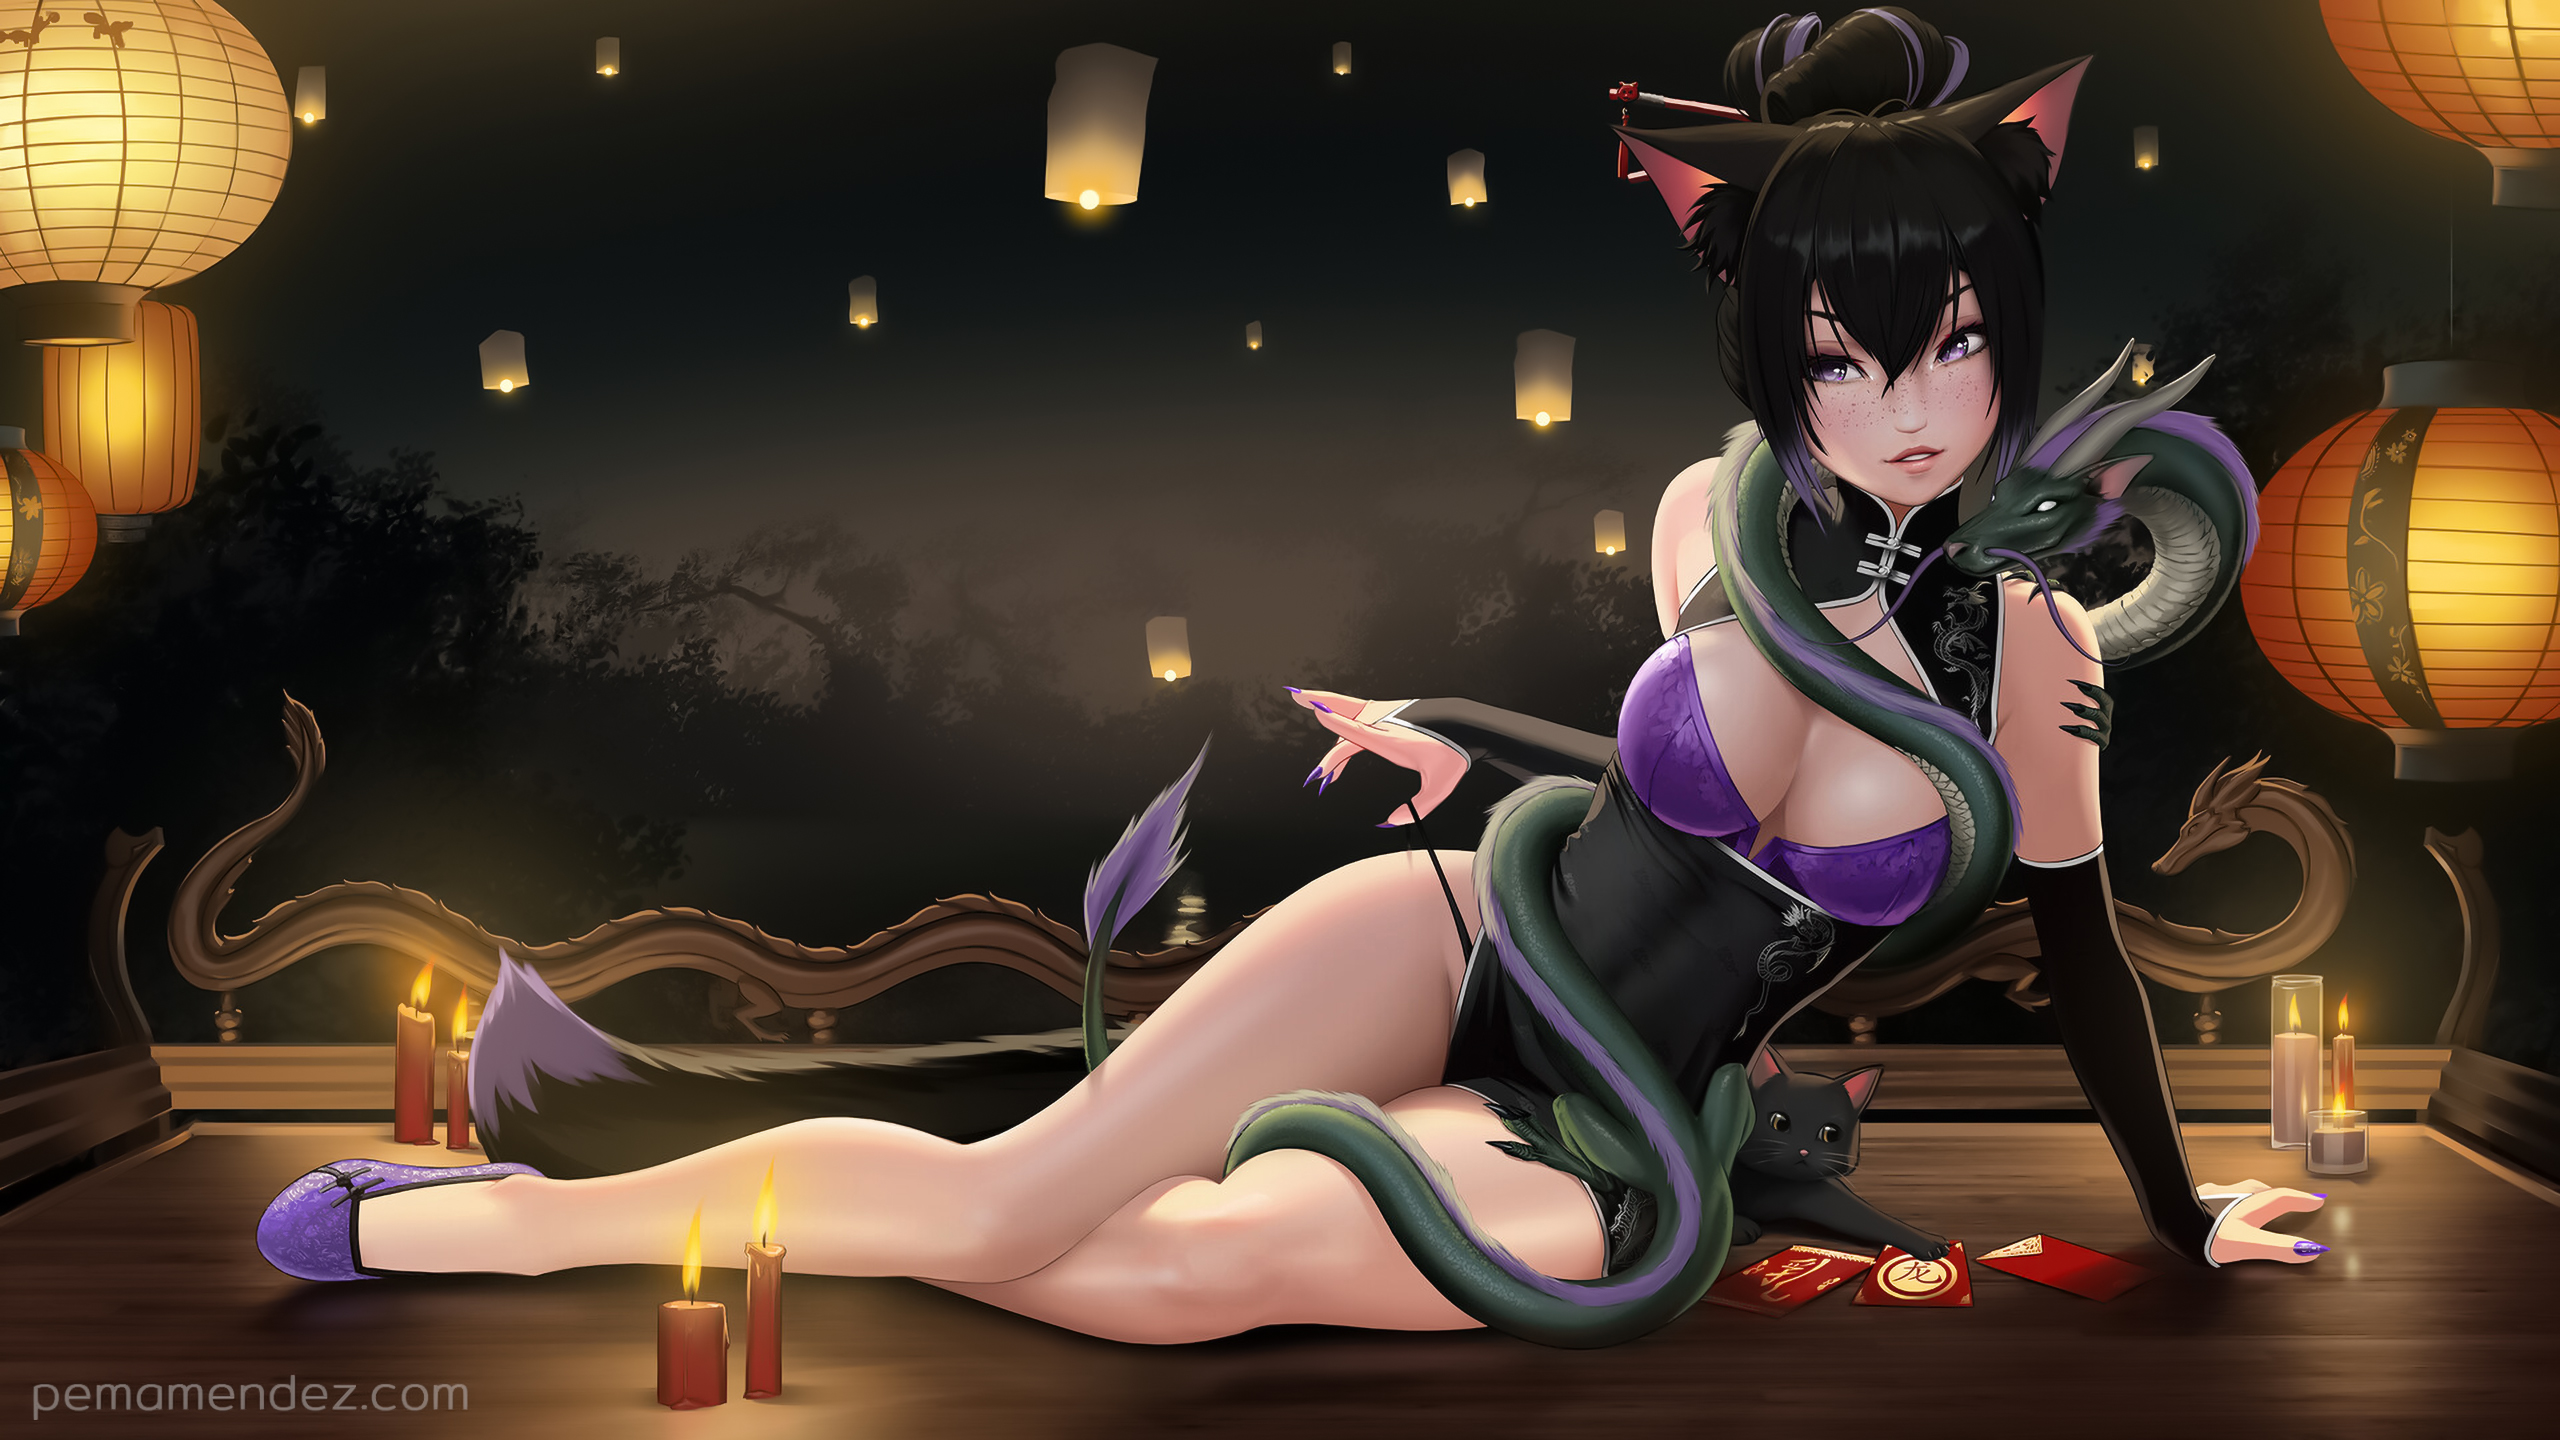 General 2560x1440 Emanuel Mendez women drawing pulling clothing Chinese candles digital art watermarked hair between eyes cat girl cat ears bare shoulders cleavage big boobs sky lanterns painted nails purple nails black hair parted lips freckles creature thighs legs fire cats animals cat tail